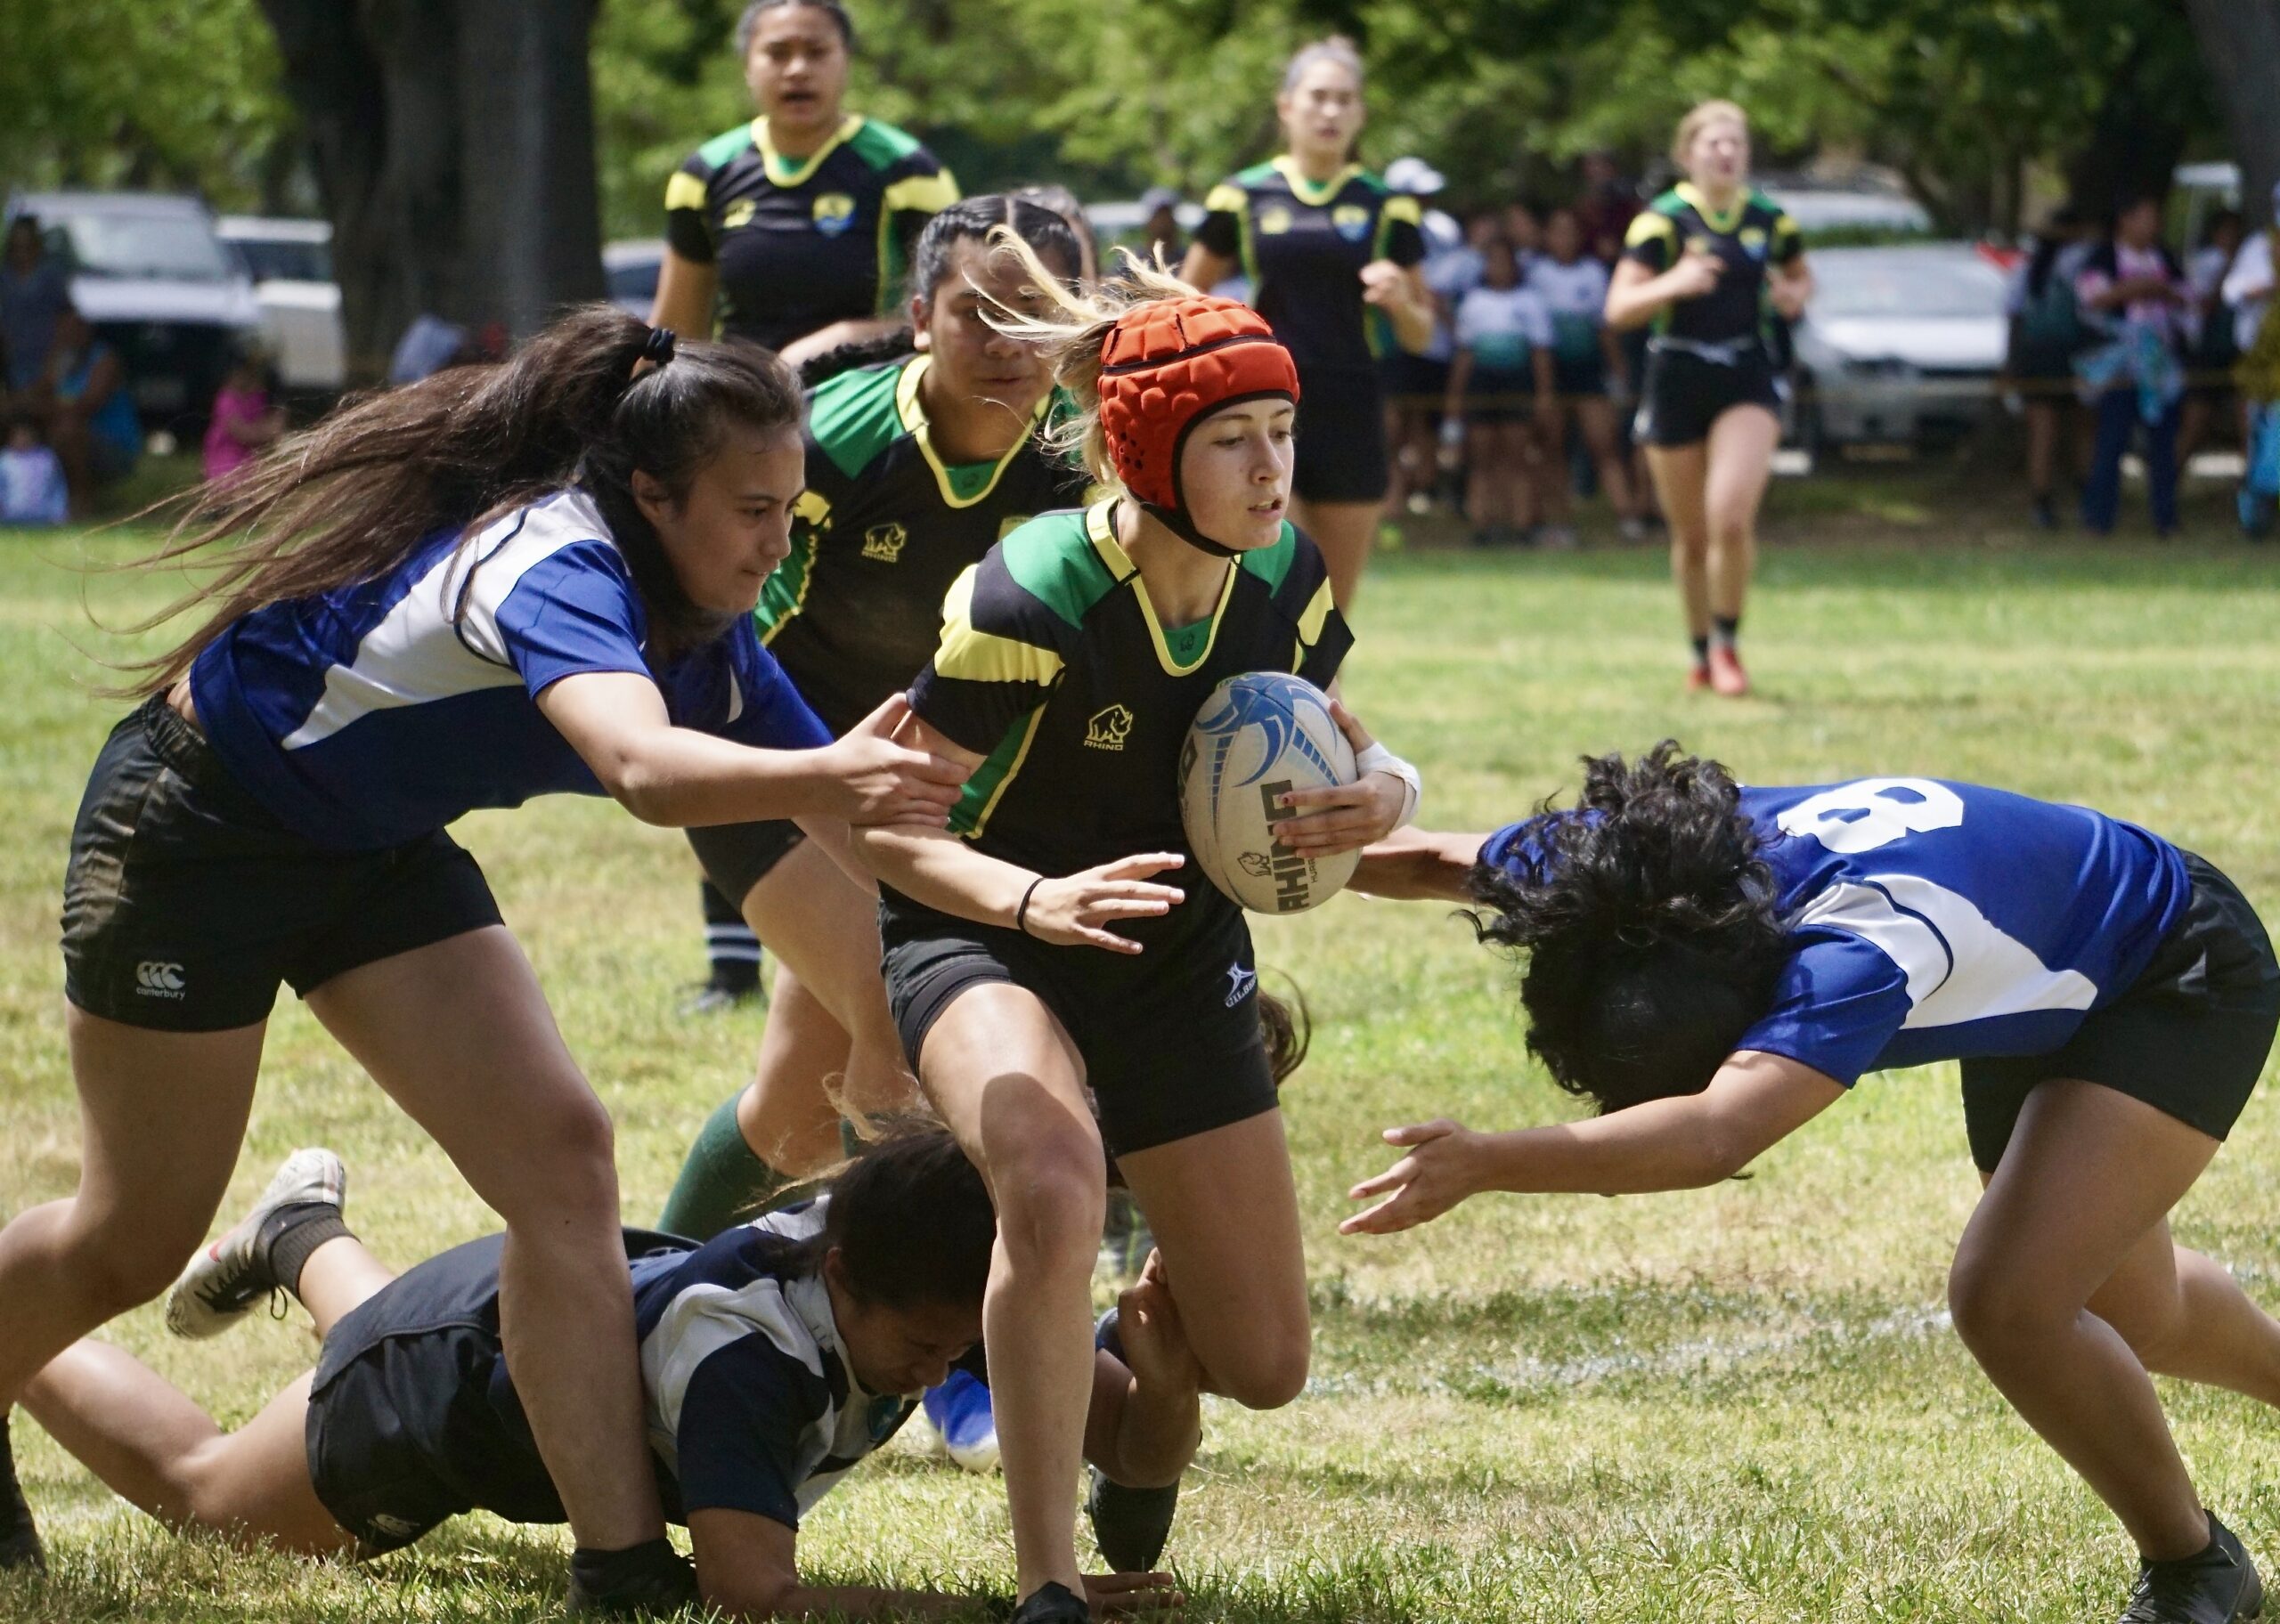 Pleasanton rugby tackled by Sacramento Amazons rugby